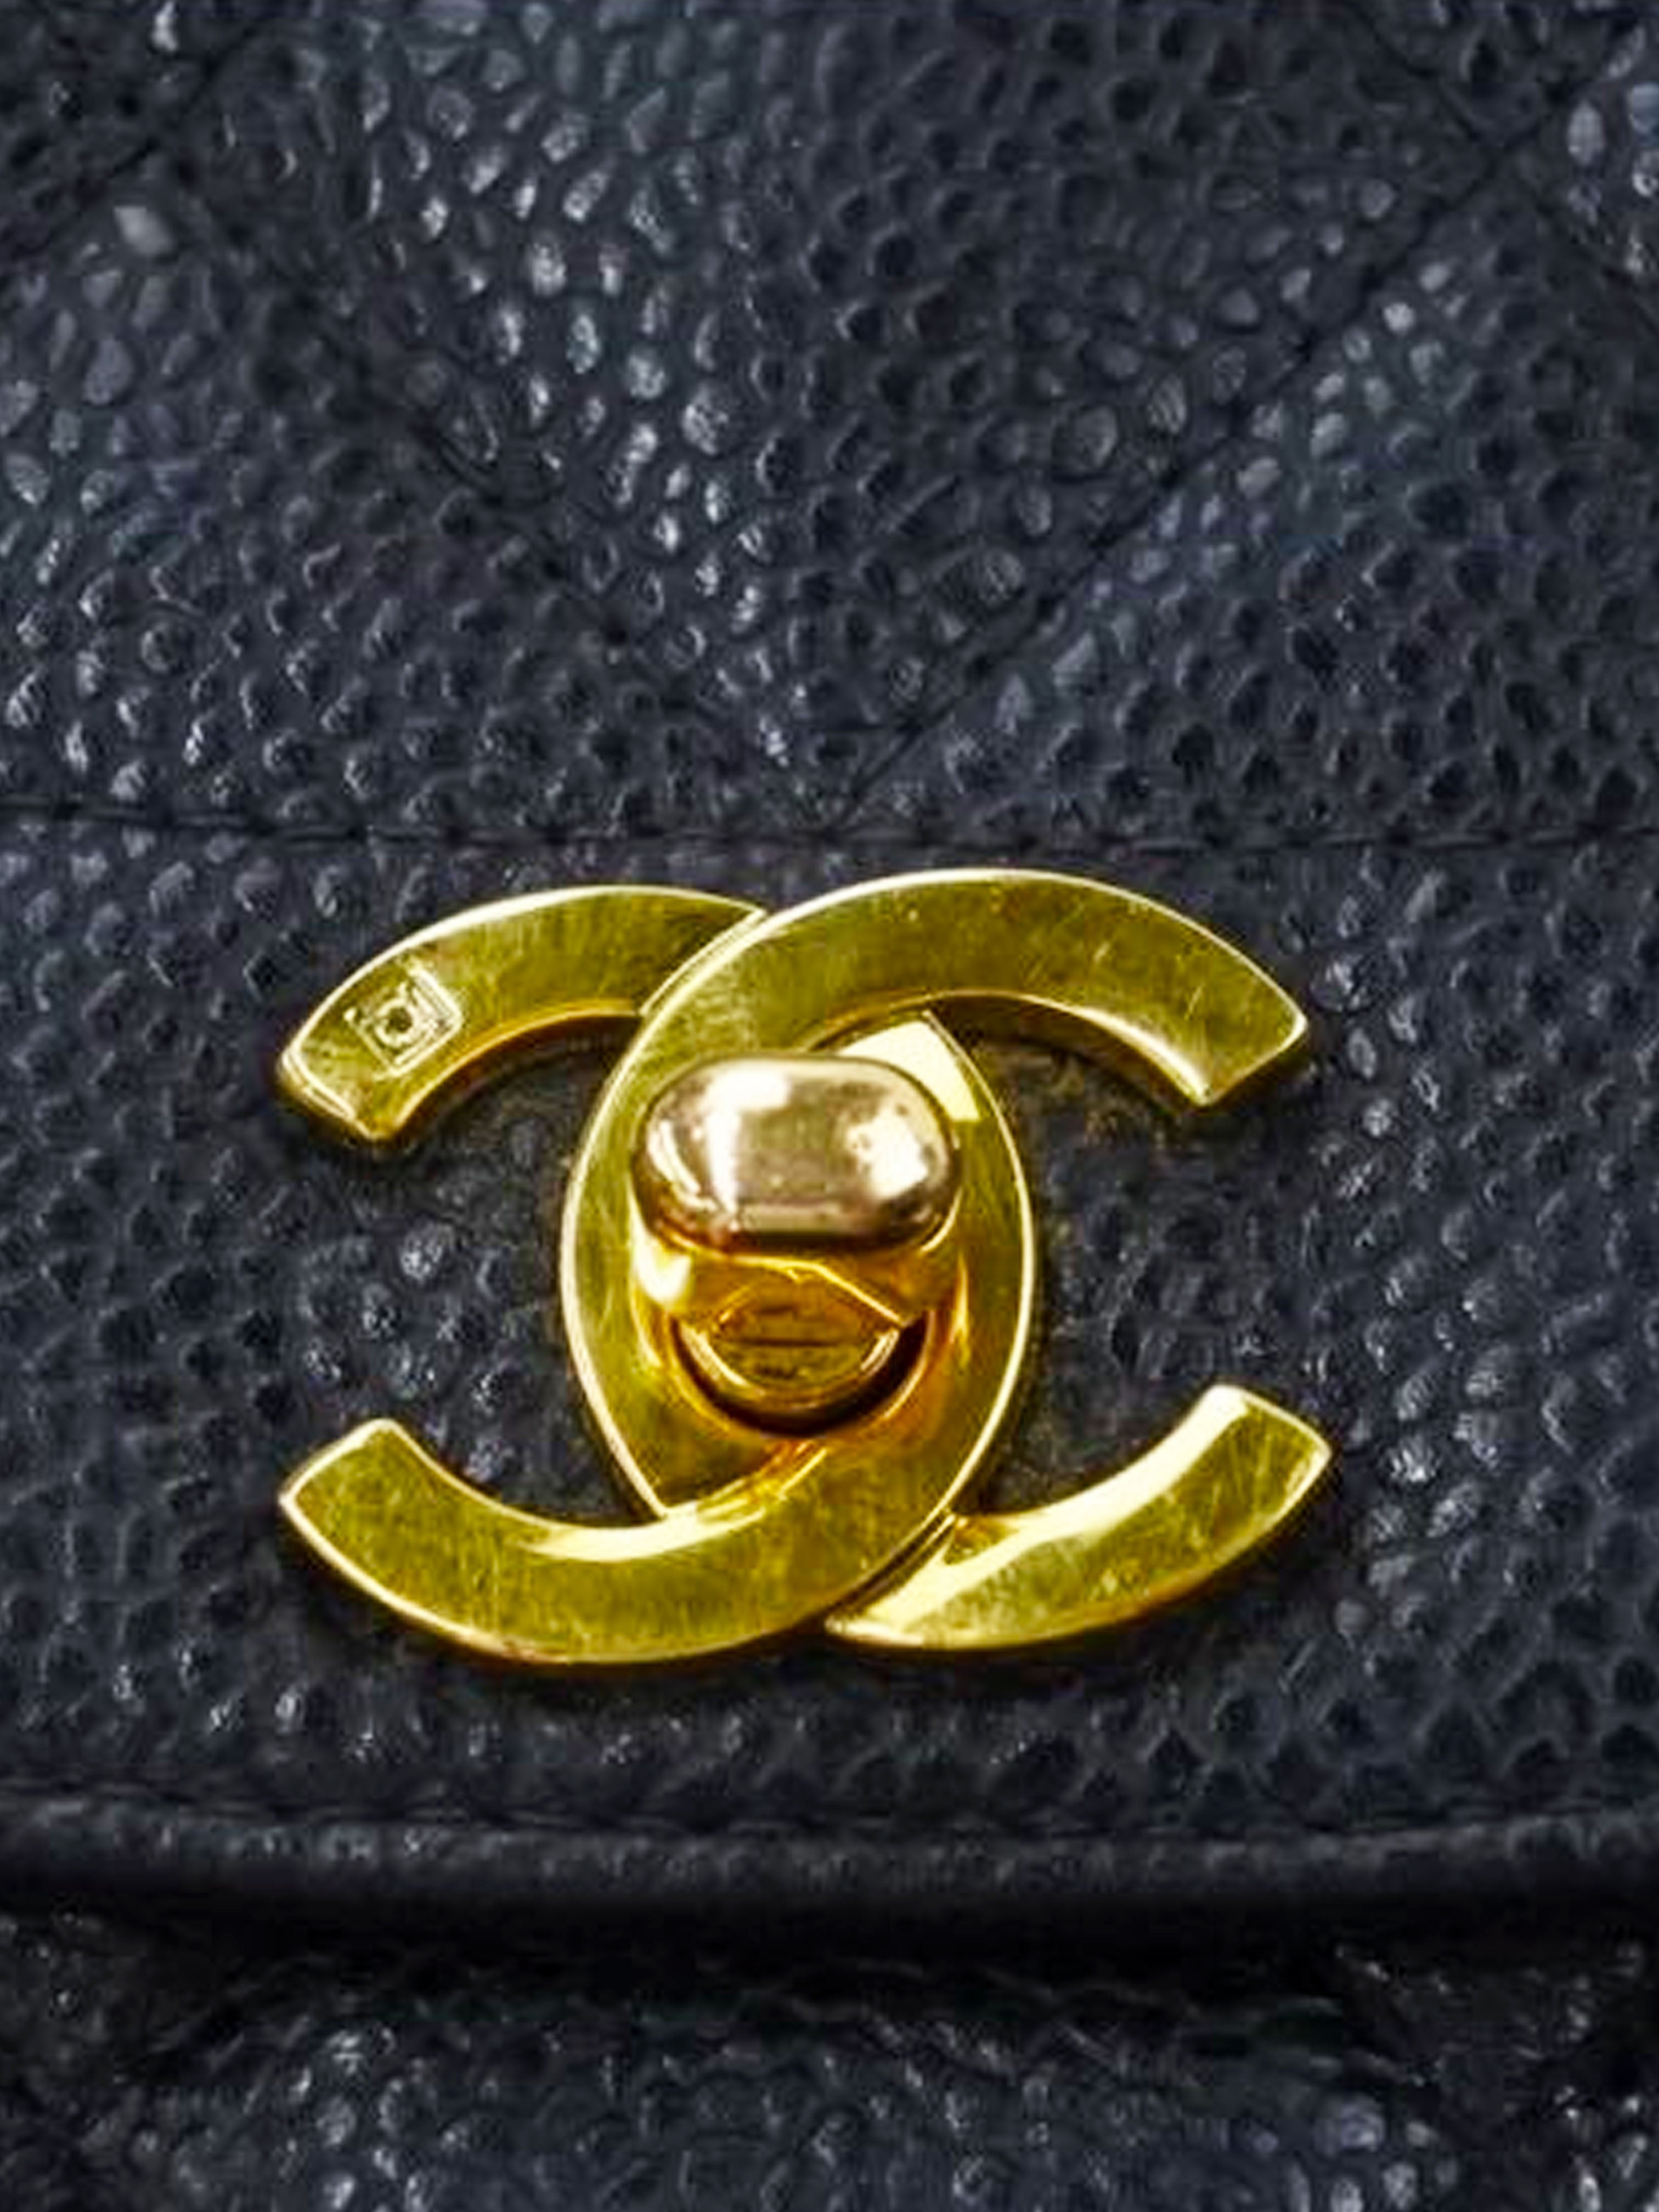 Chanel 1990s Diana Single Flap Bag with Gold Plated Hardware